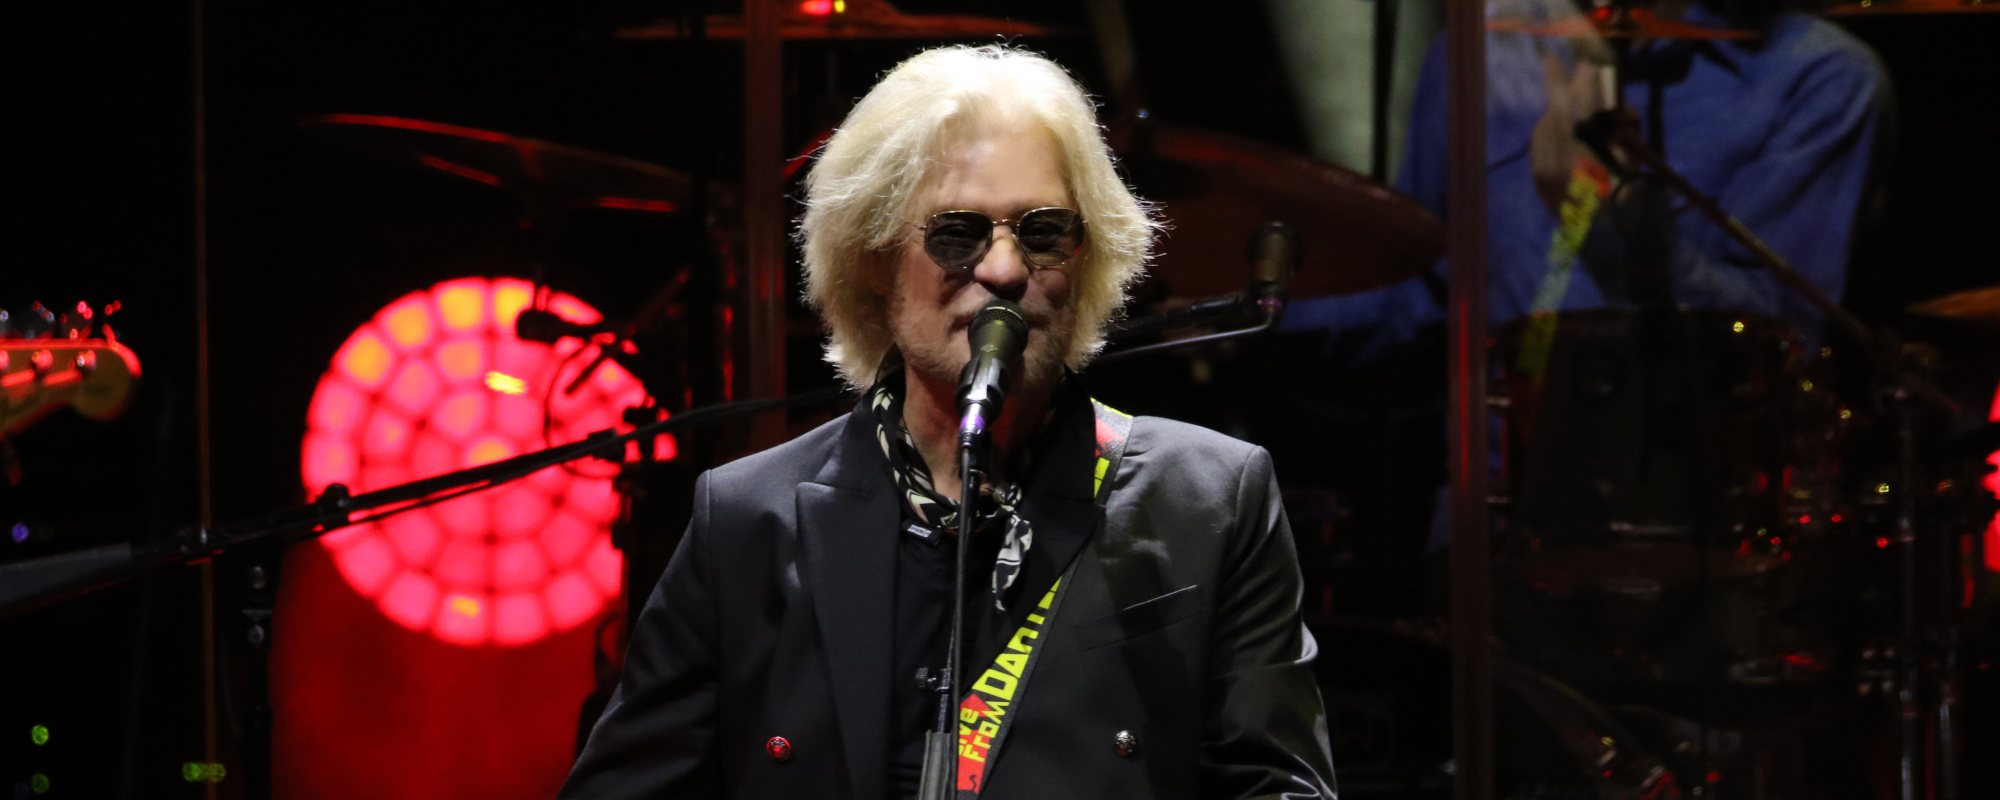 Daryl Hall Set to Release New Solo Retrospective LP, Tour With Todd Rundgren